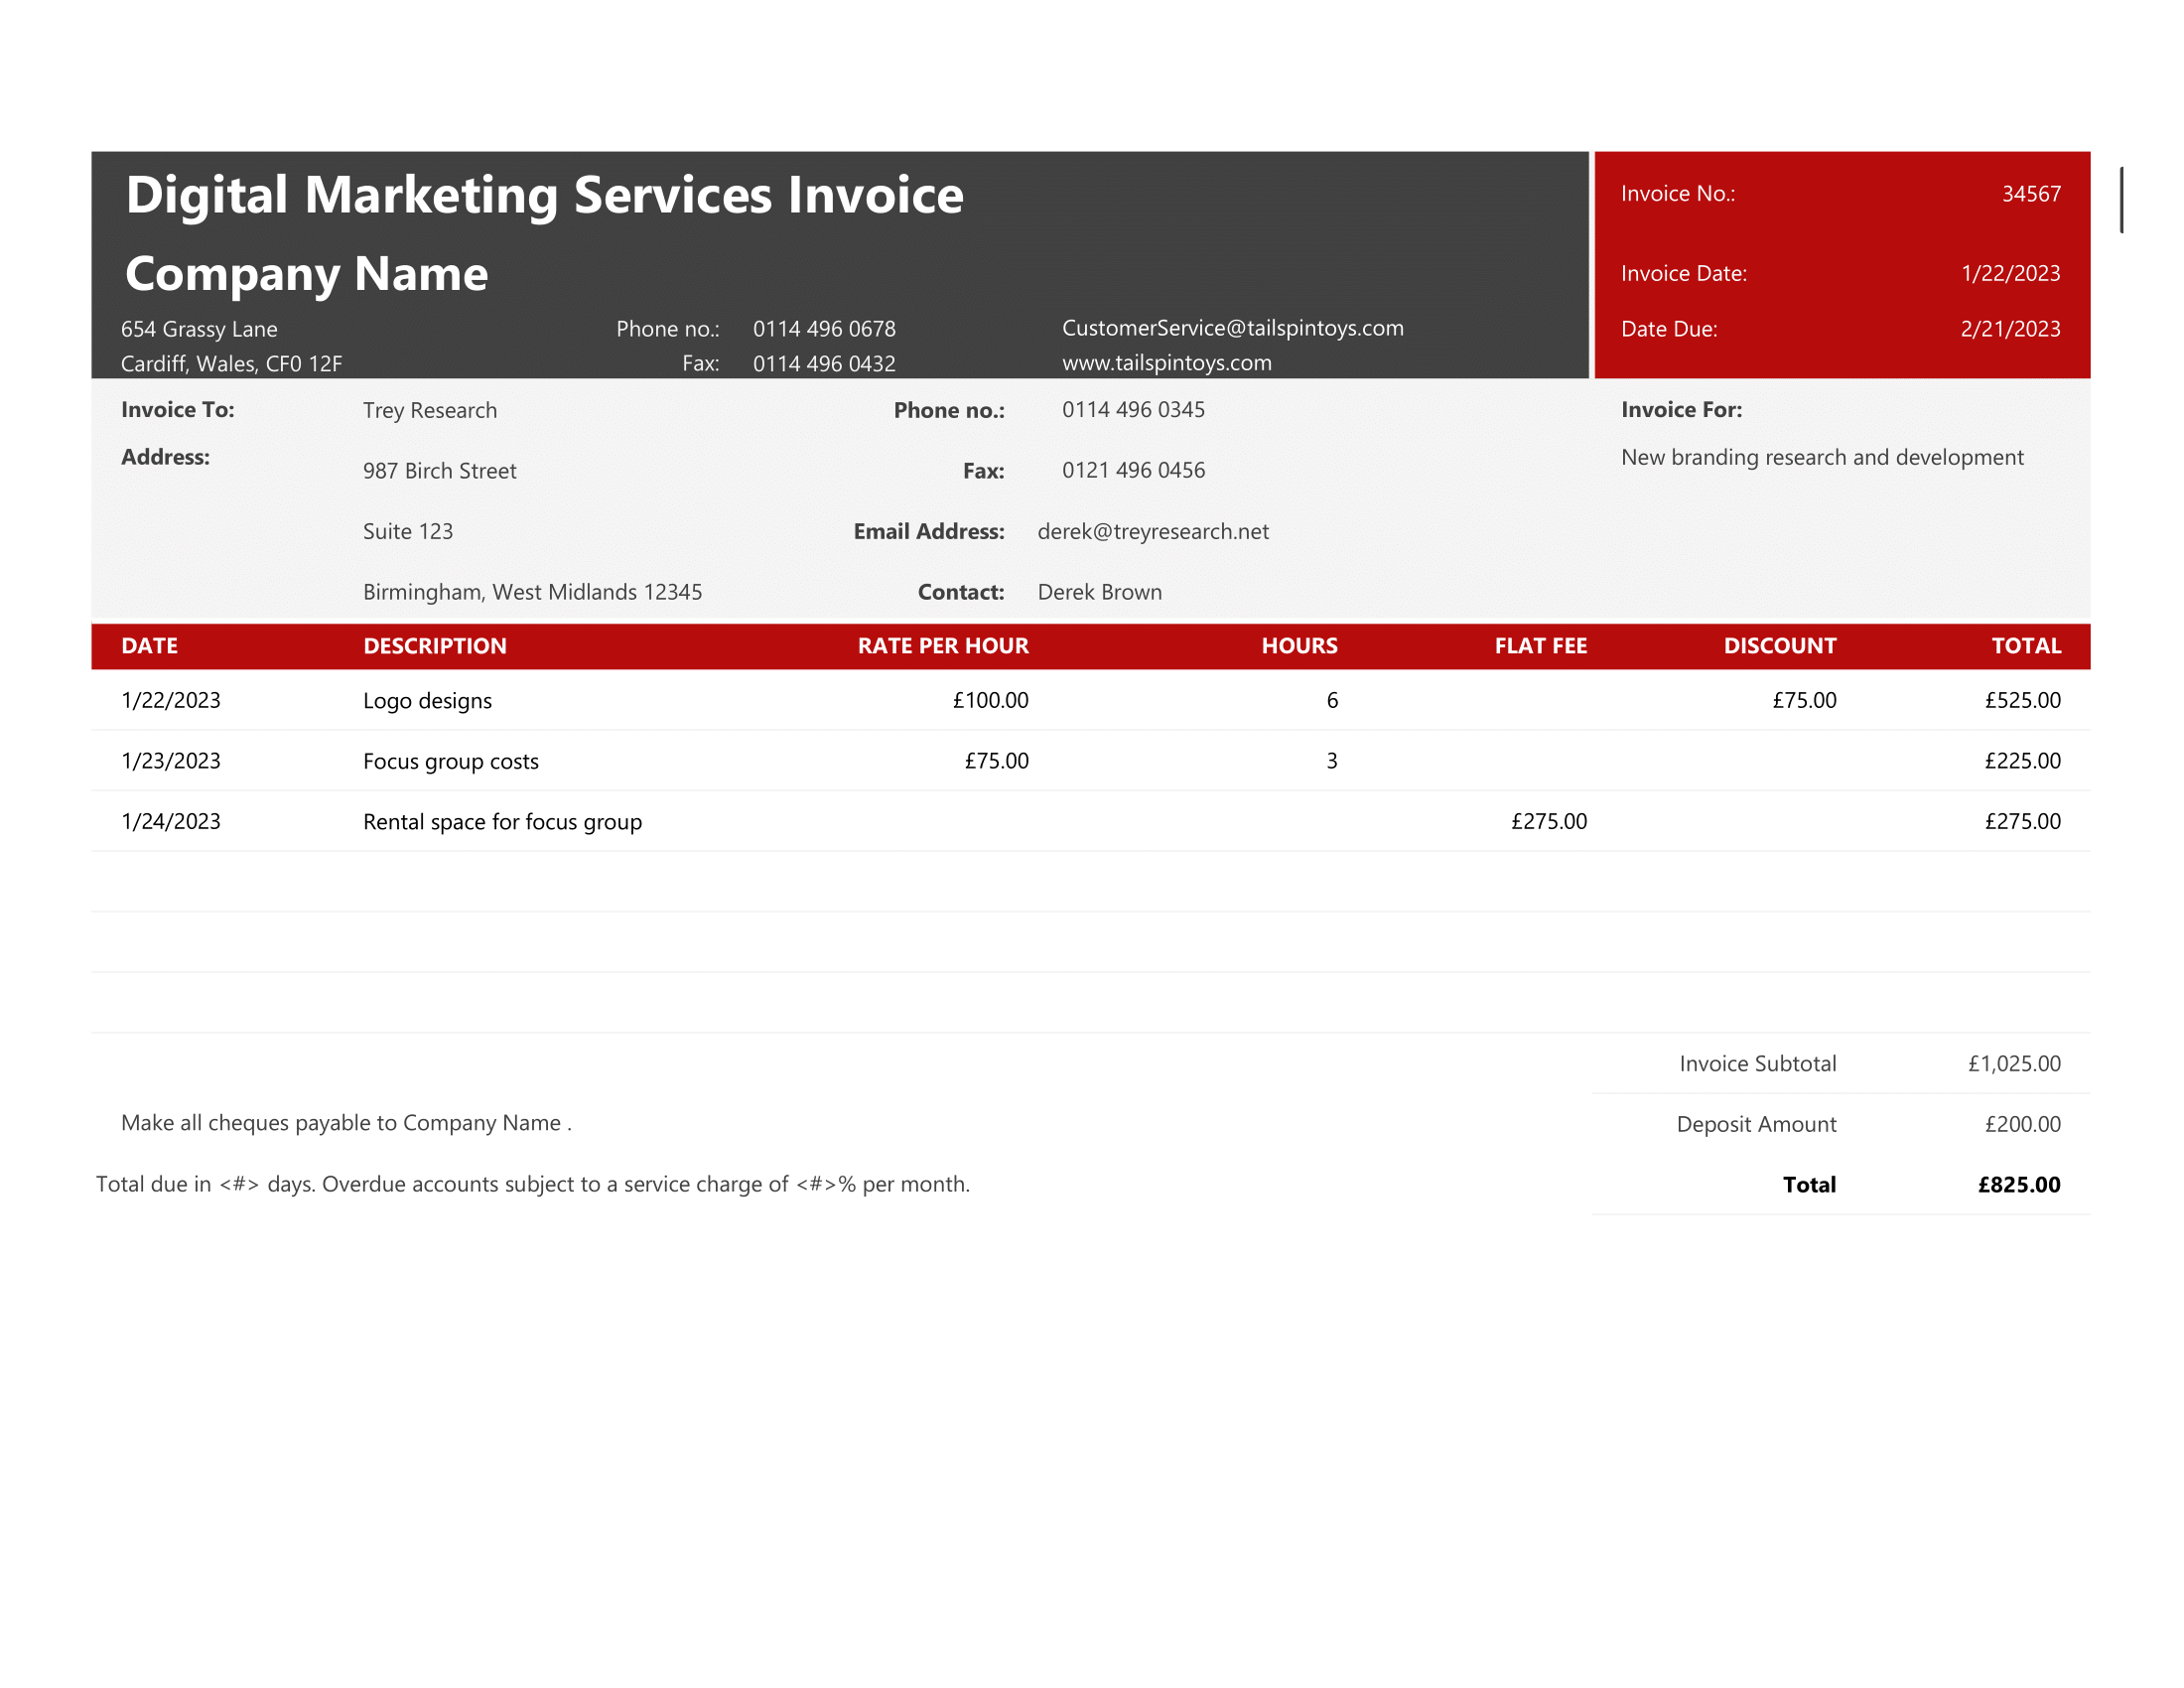 Digital Marketing Services Invoice Template in Excel